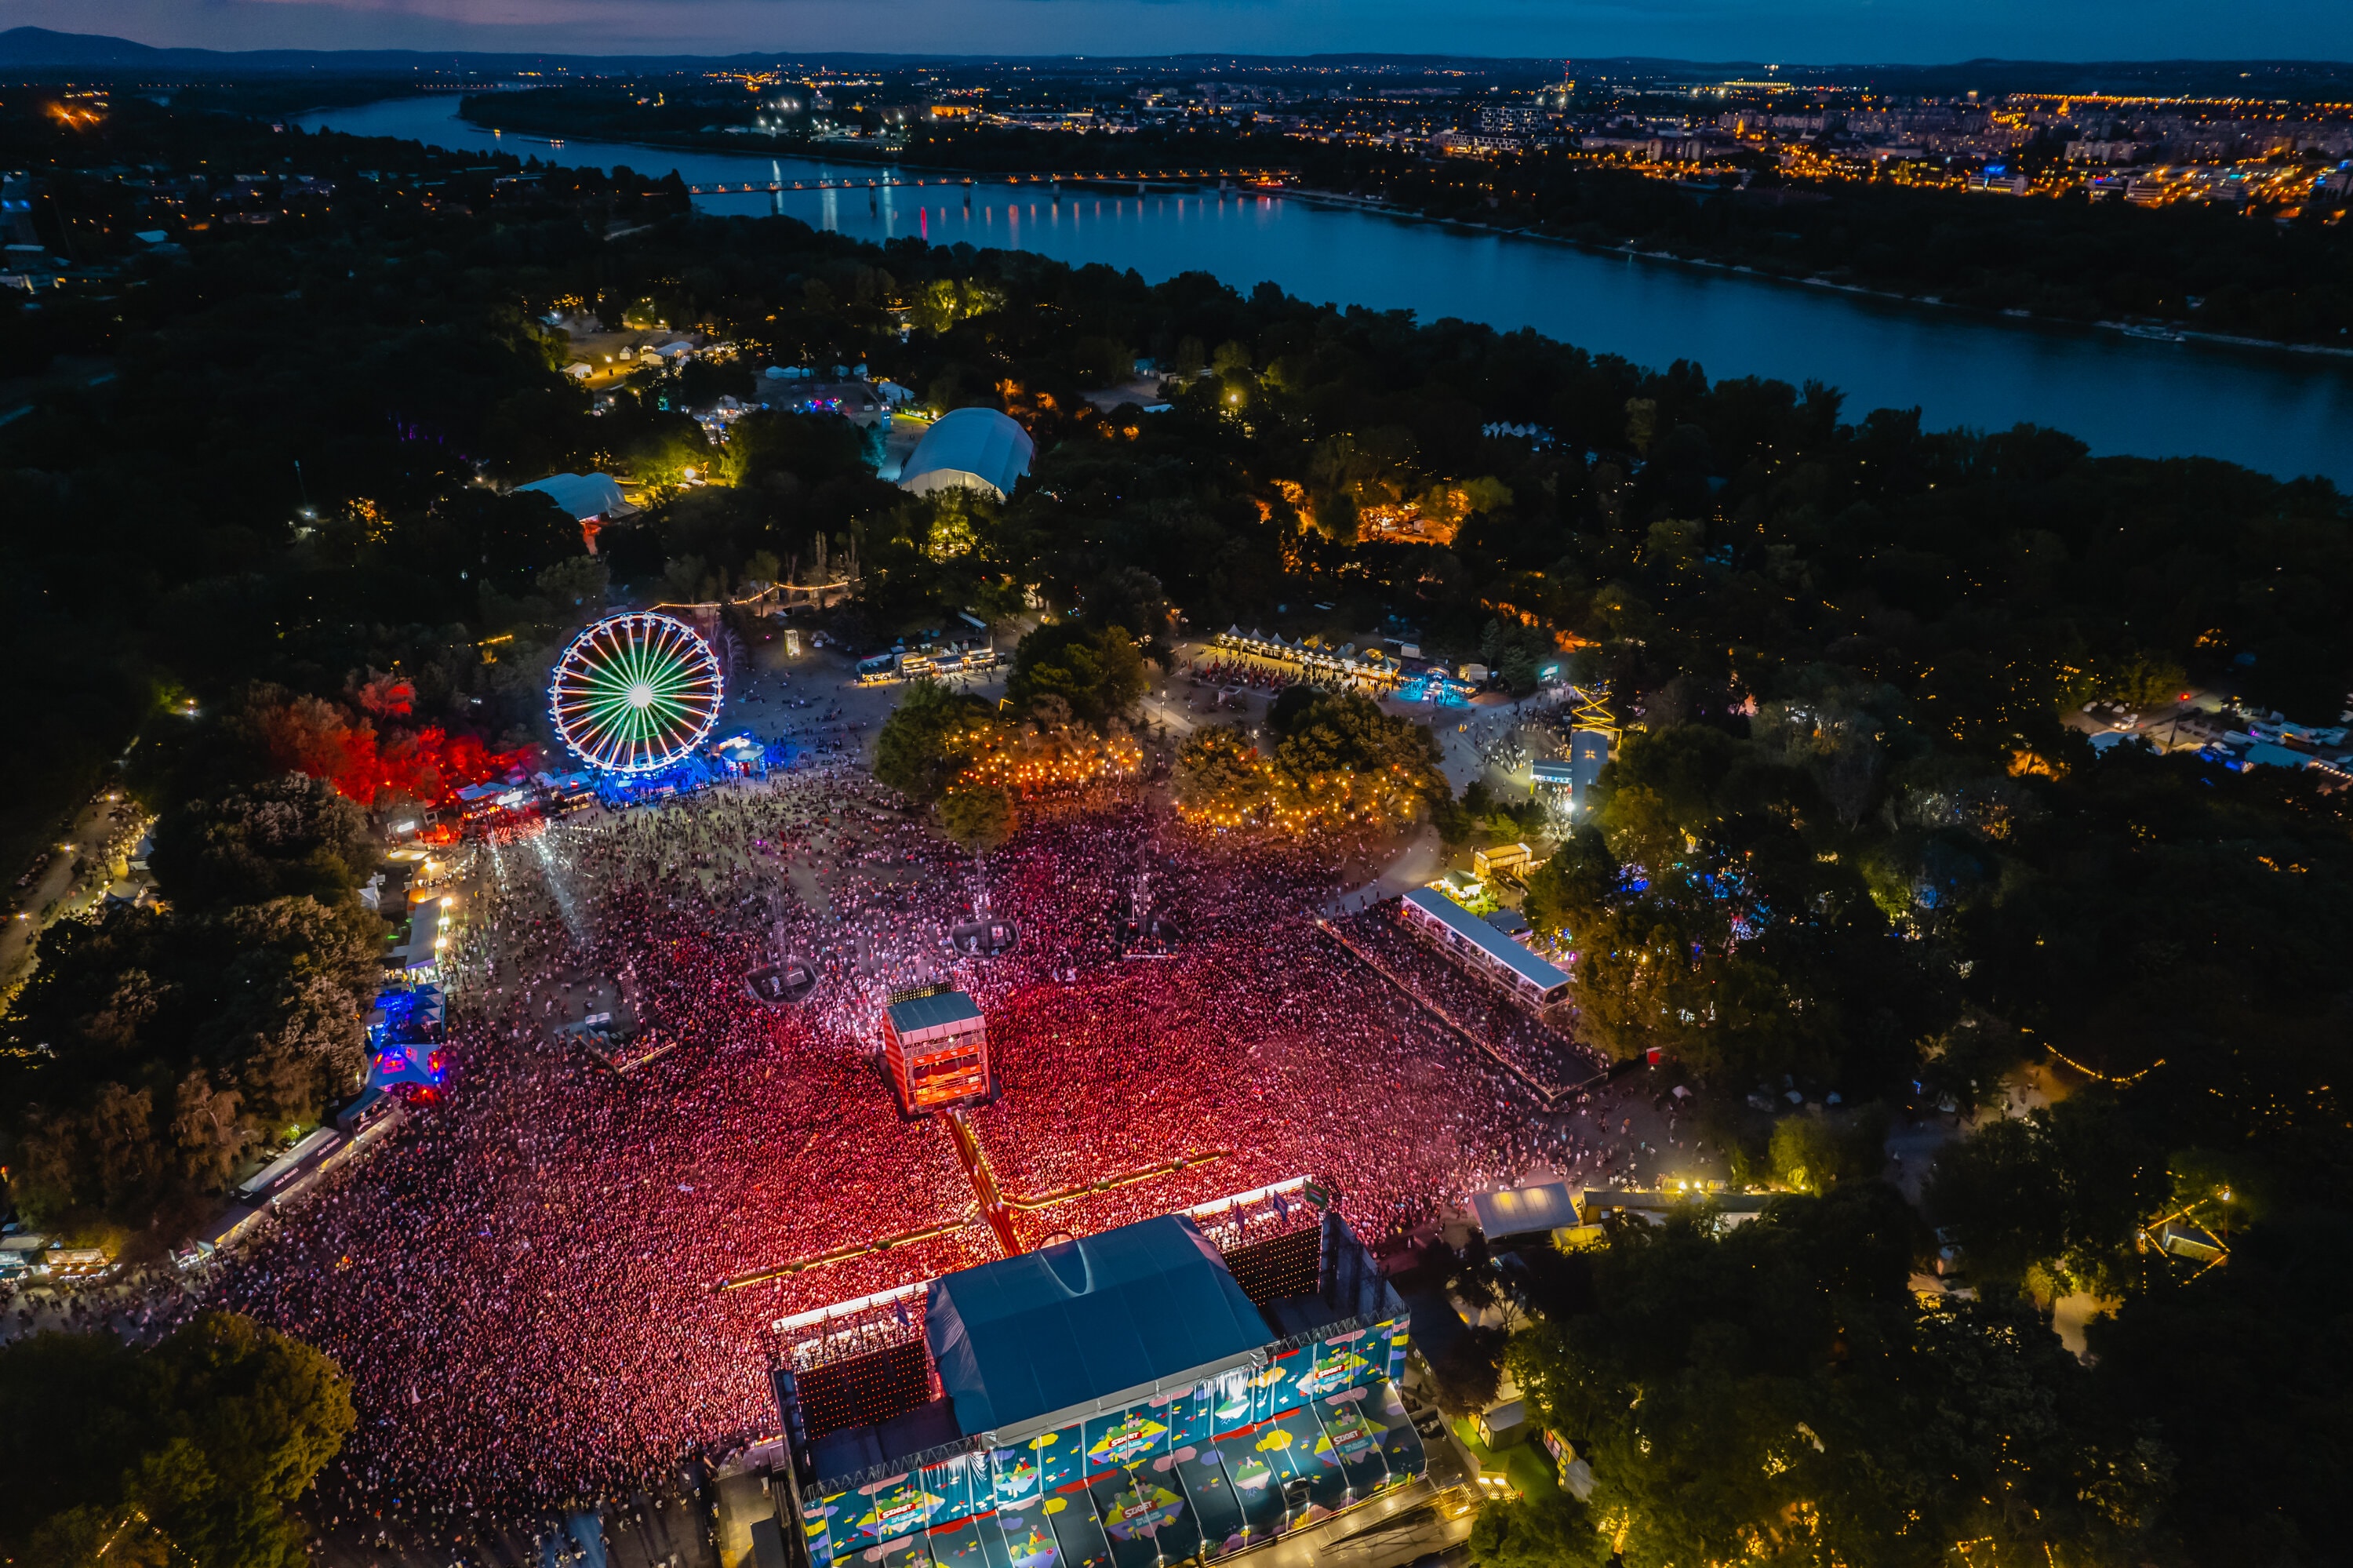 Aerial photo of Sziget festival, with Danube river in the background